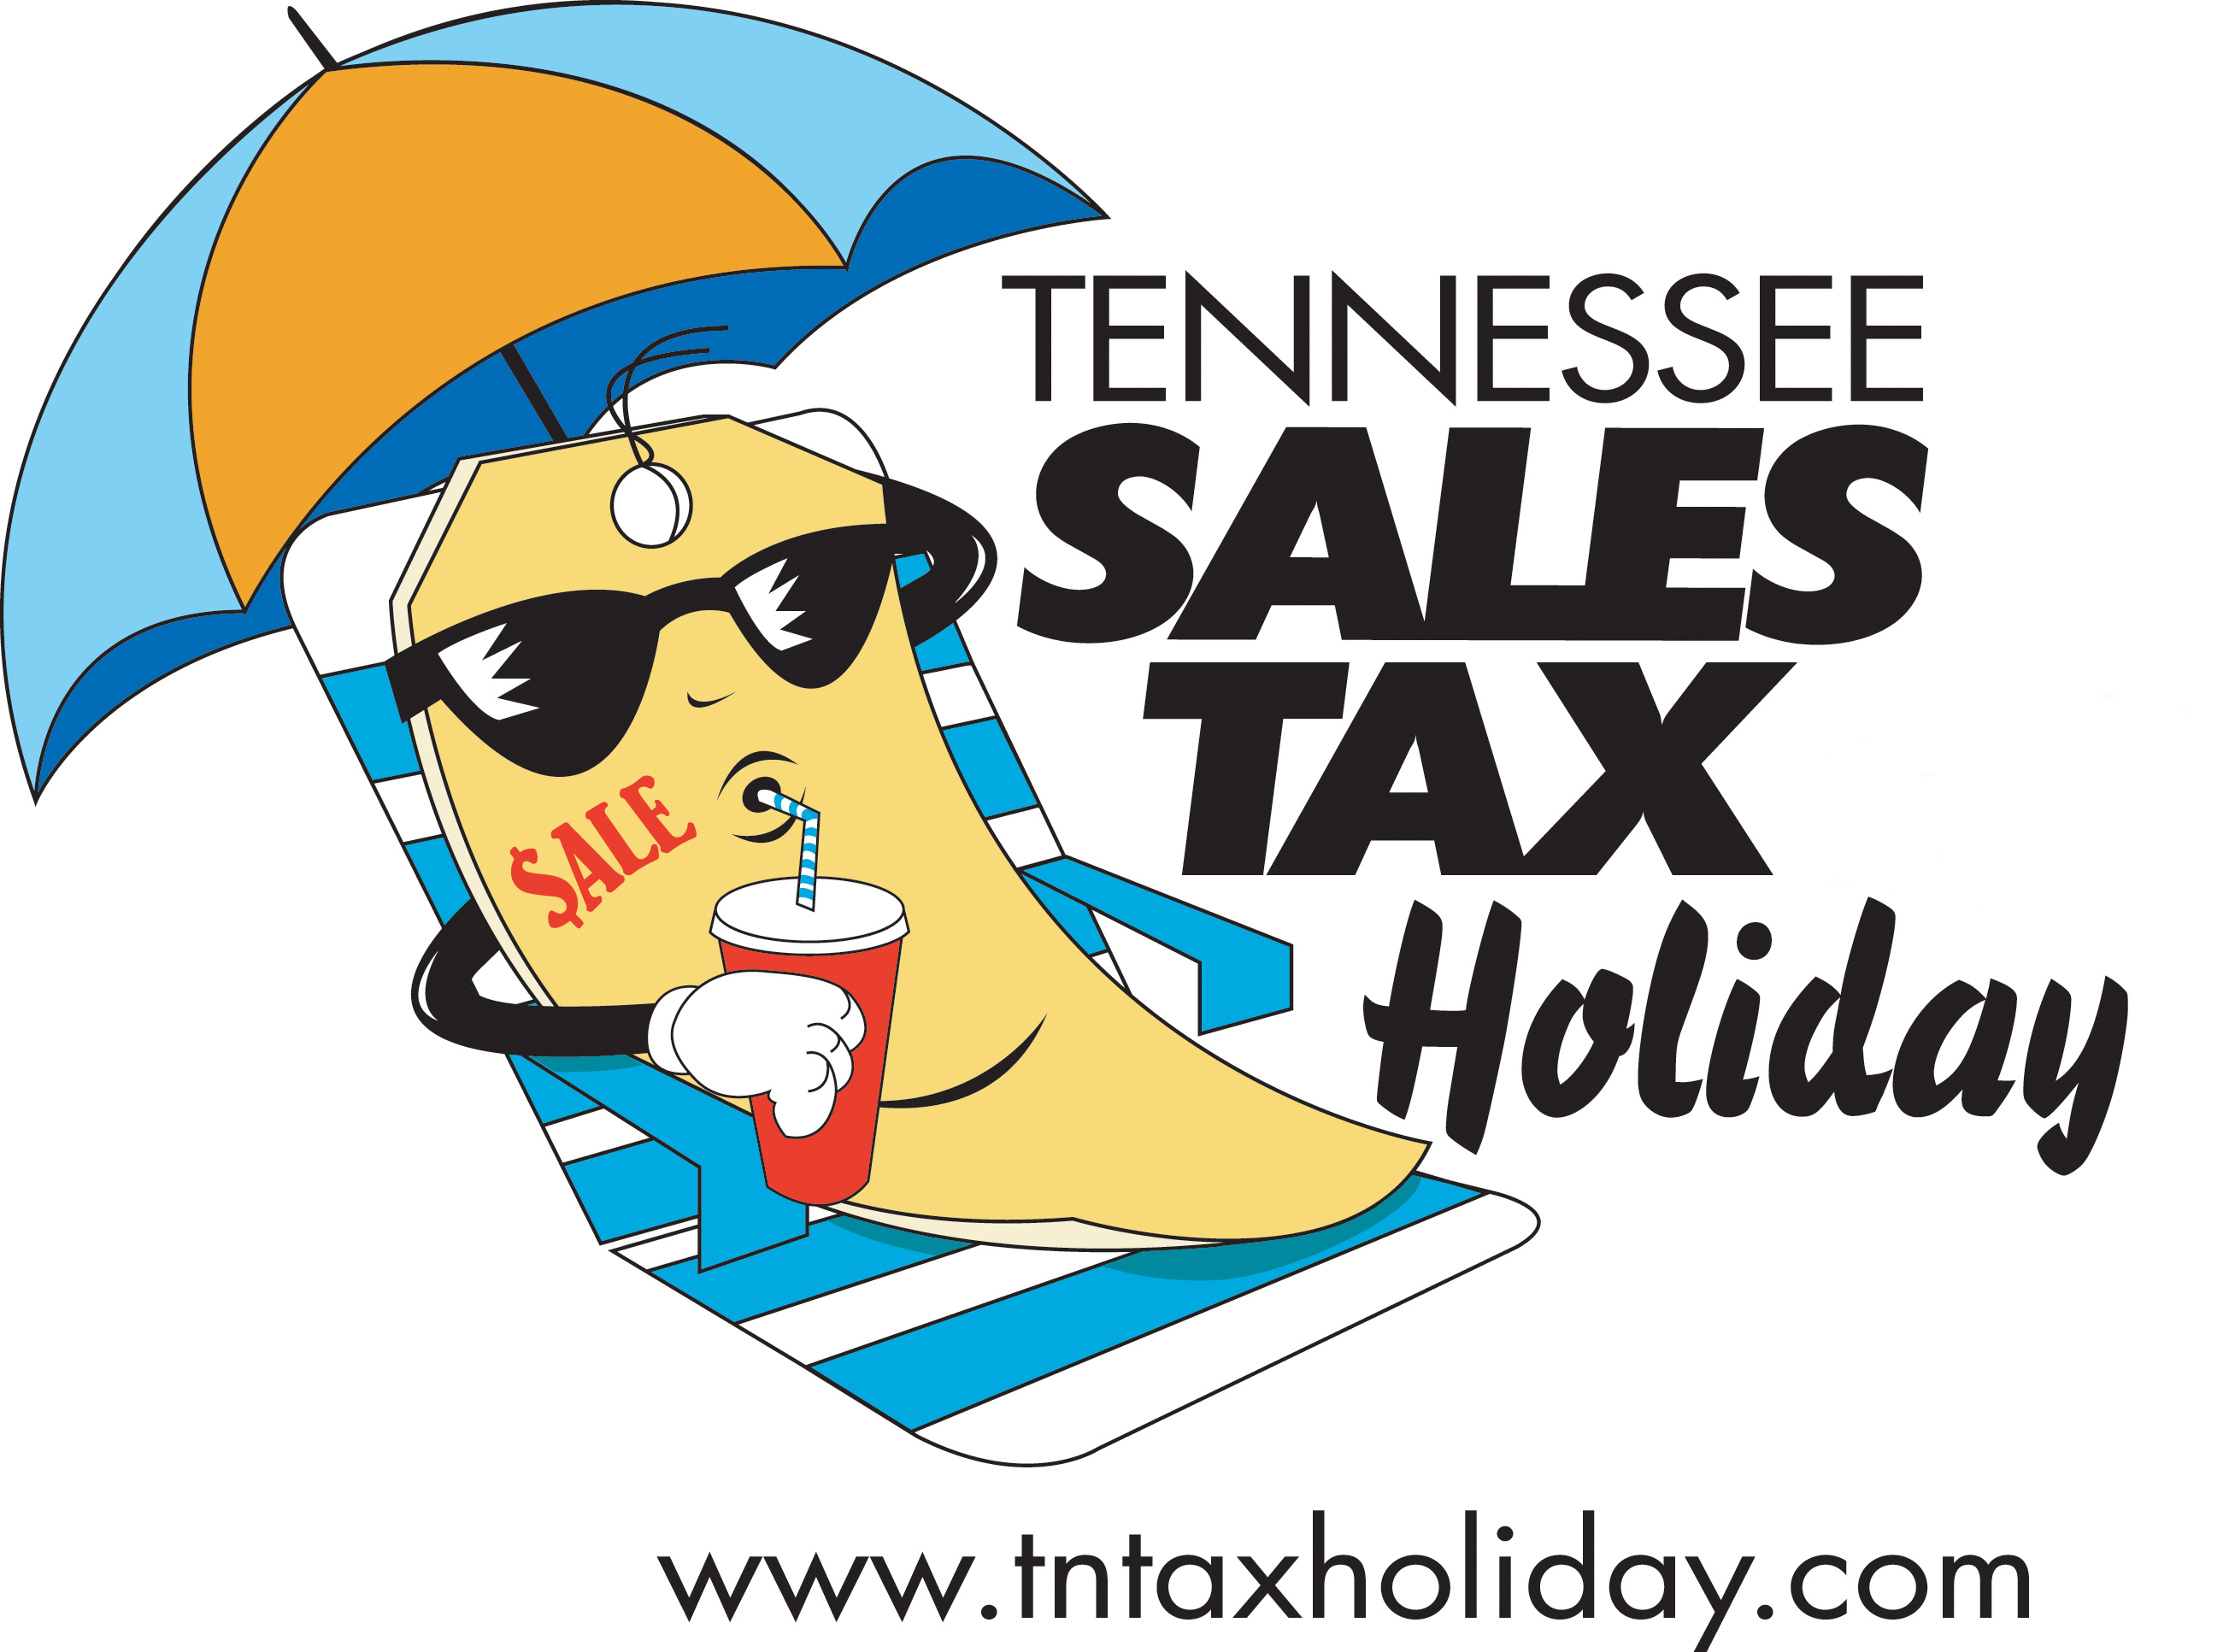 Tax Free Holiday on Friday!